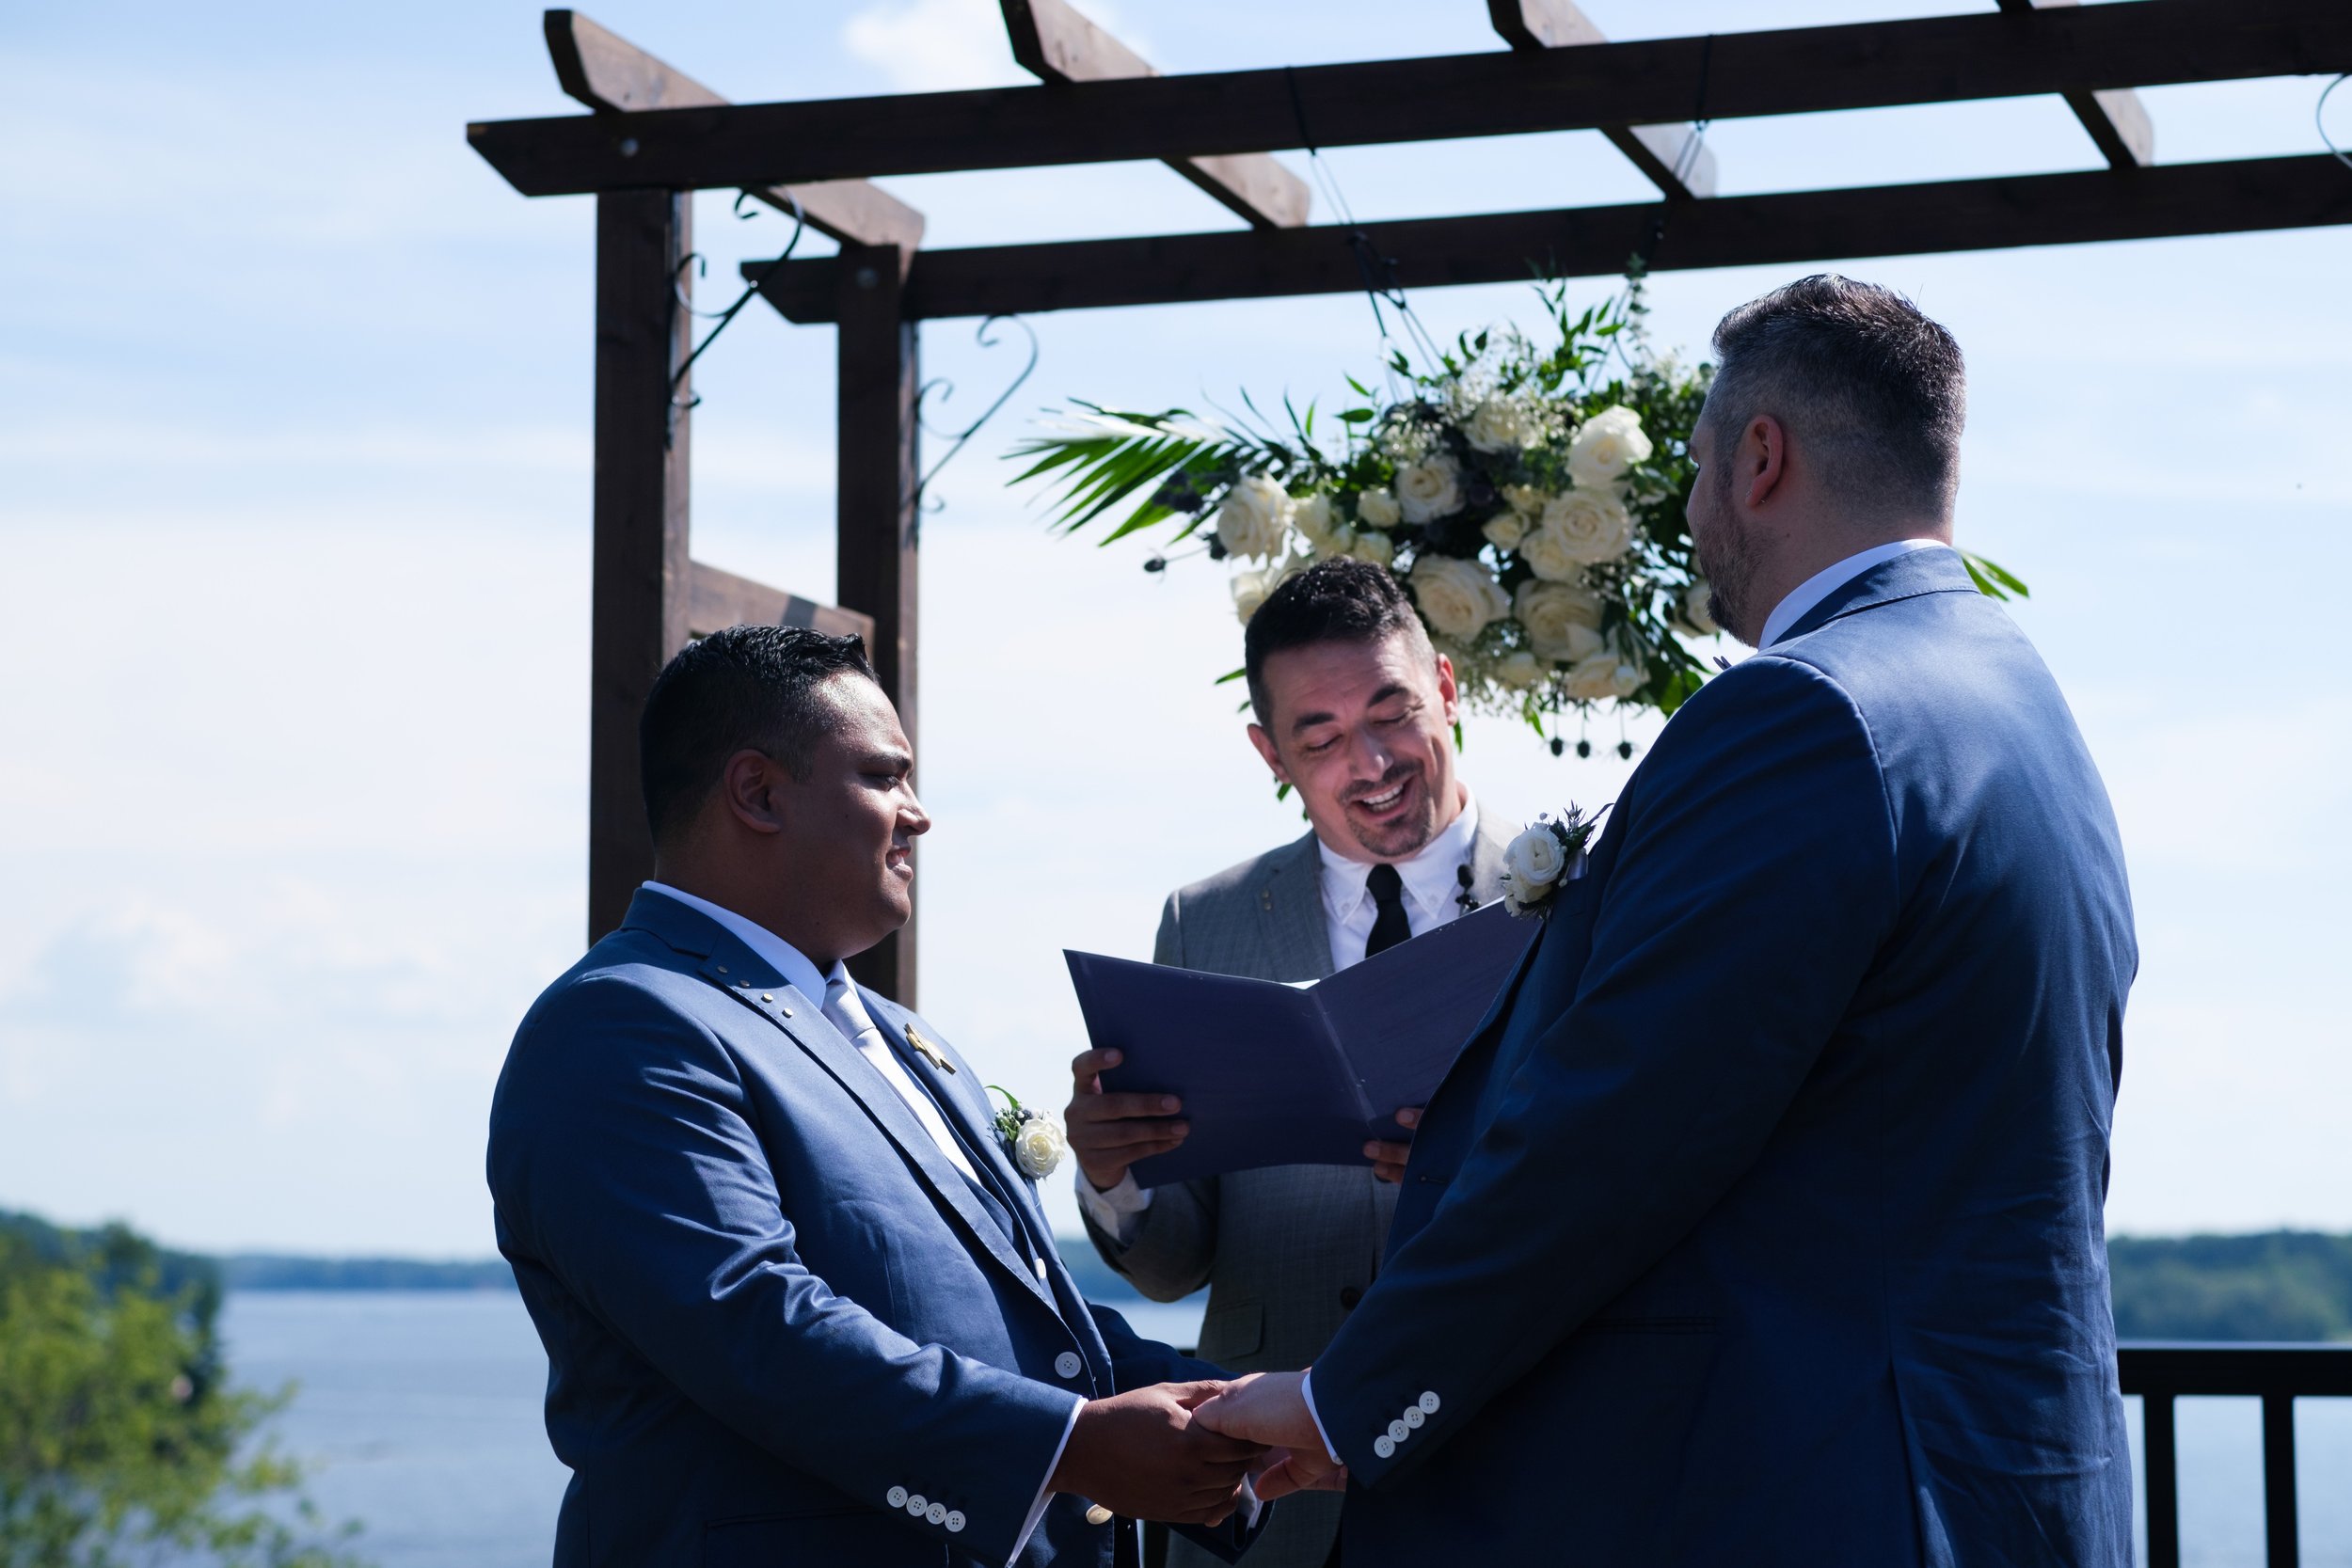  A color candid wedding photograph of Bryan + Adam exchanging wedding vows while their friend officiates  during their  outdoor wedding cermony  at the JW Marriot The Rosseau in Muskoka by Toronto wedding photographer Scott Williams  